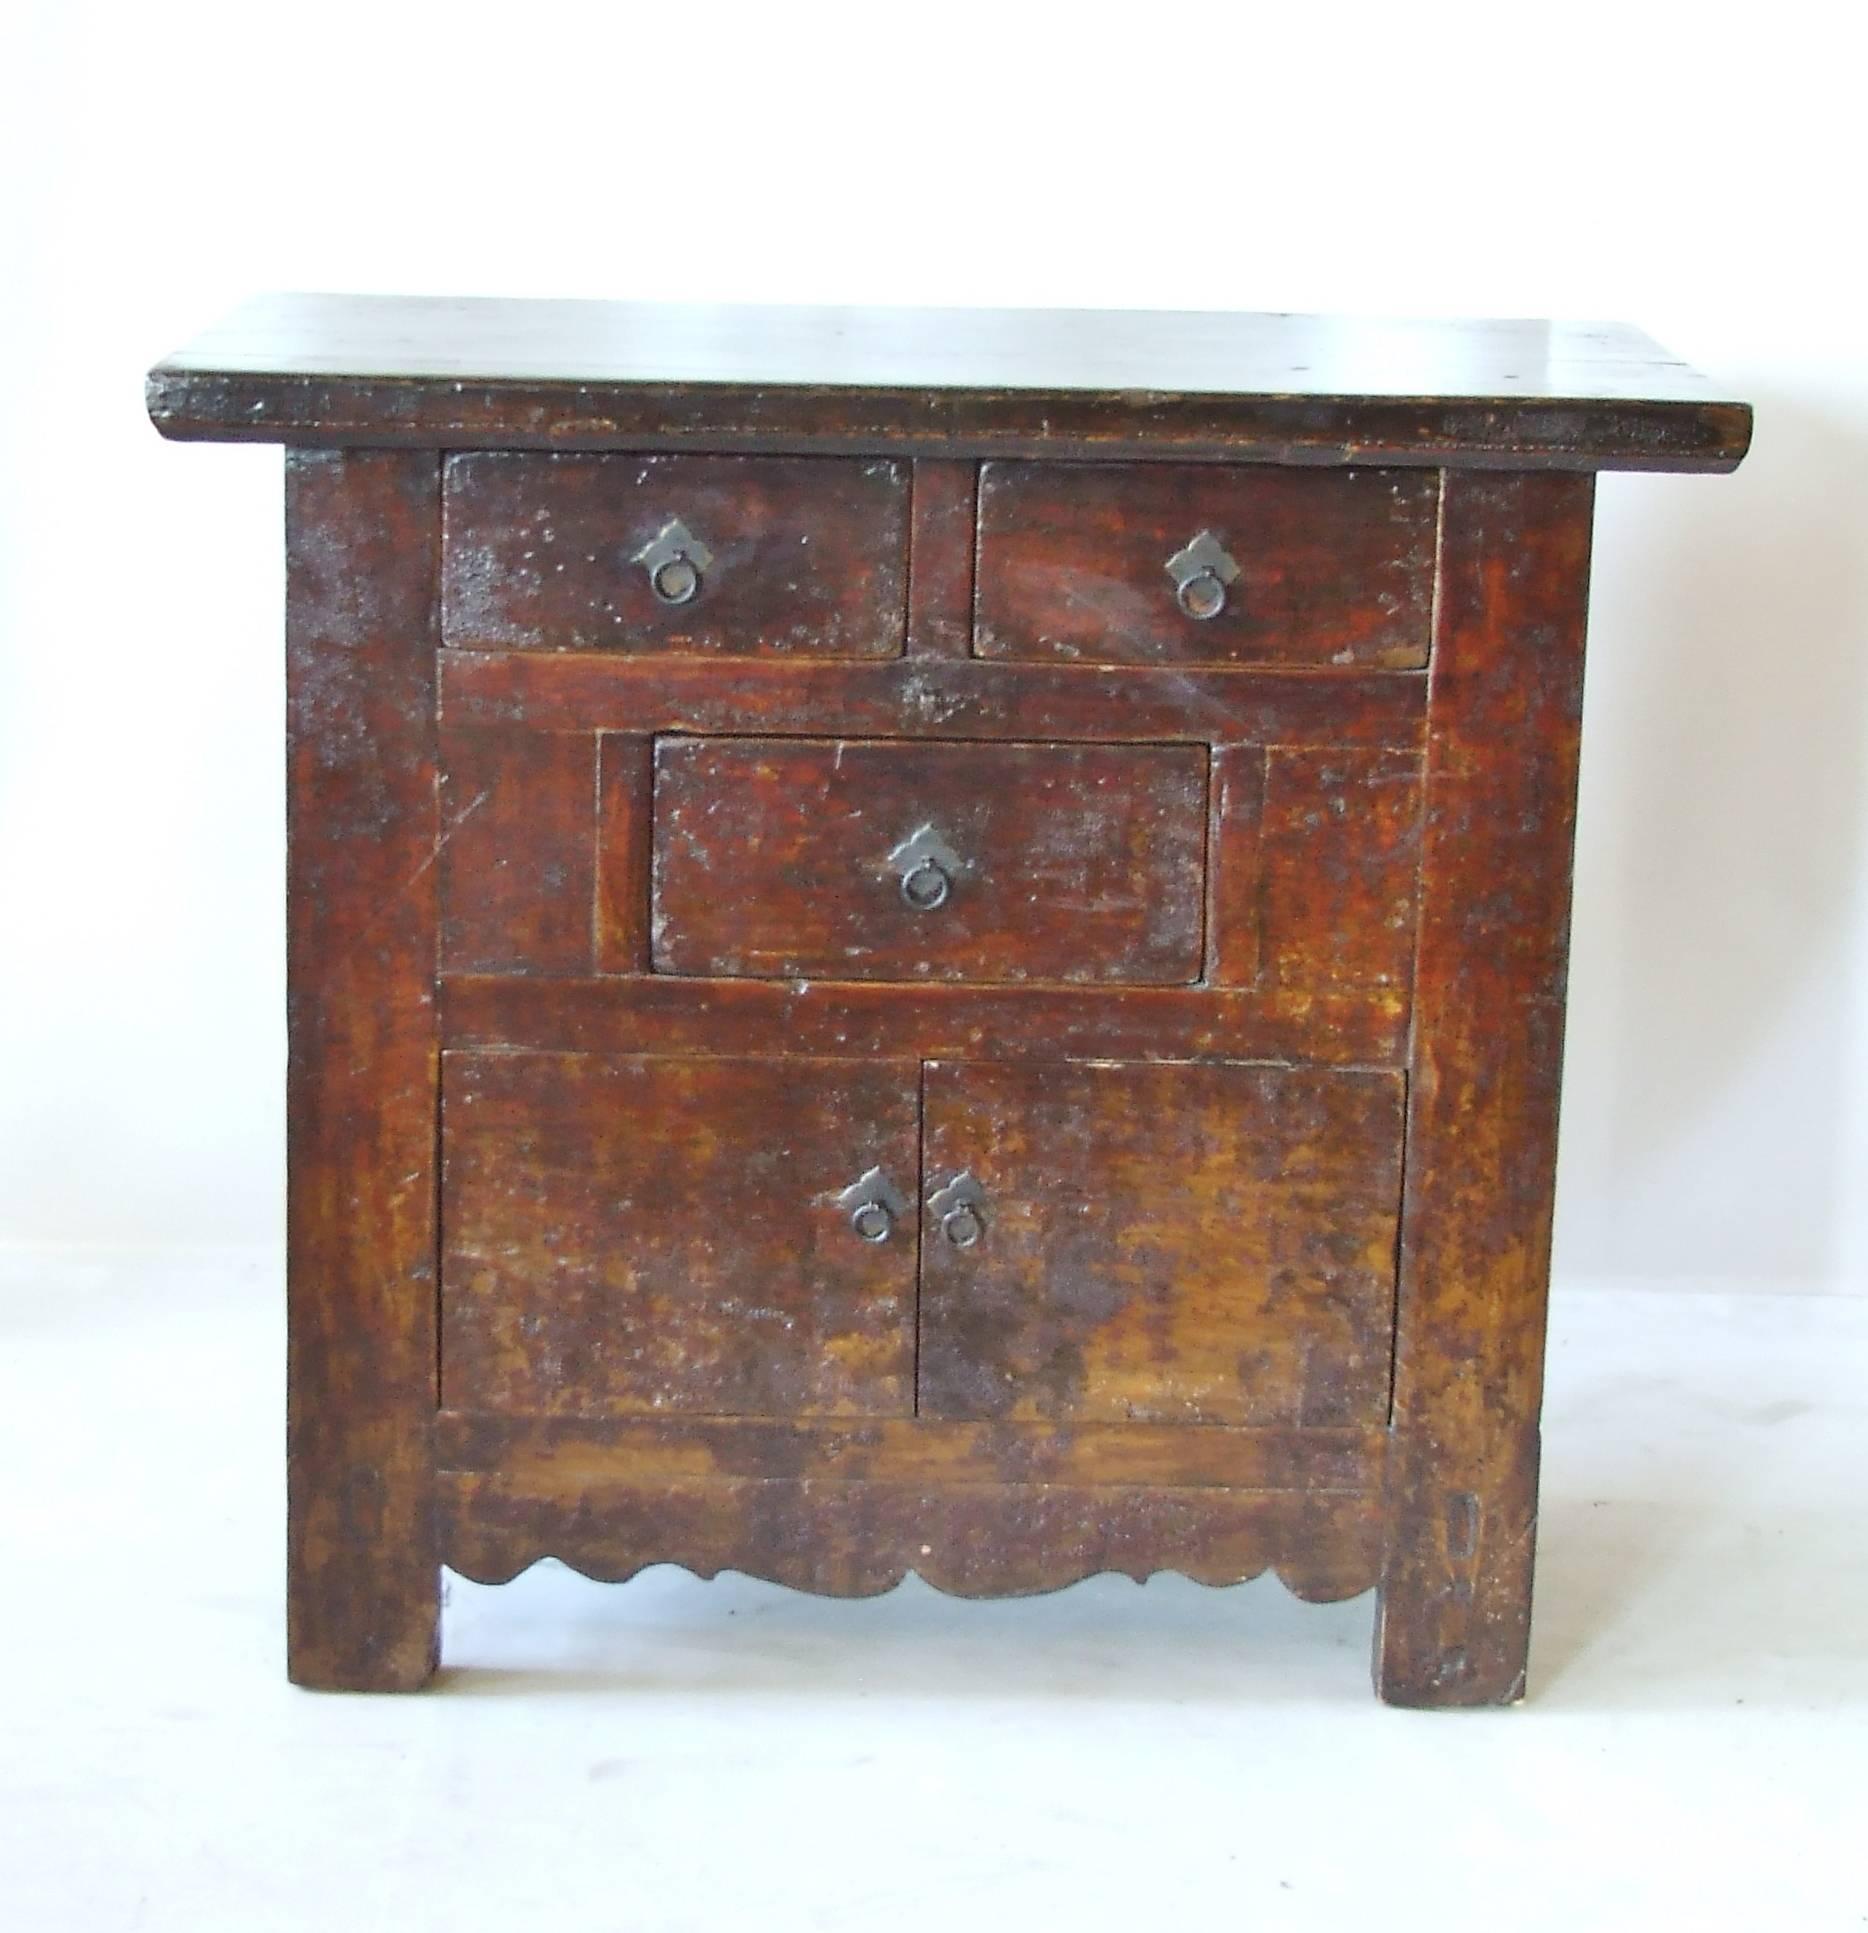 Antique Chinese elmwood coffer with original lacquer with rich chestnut tones. The Asian cabinet has three small drawers and a lower opening with two doors. The clean straight lines are complimented with the whimsical carving on the lower front